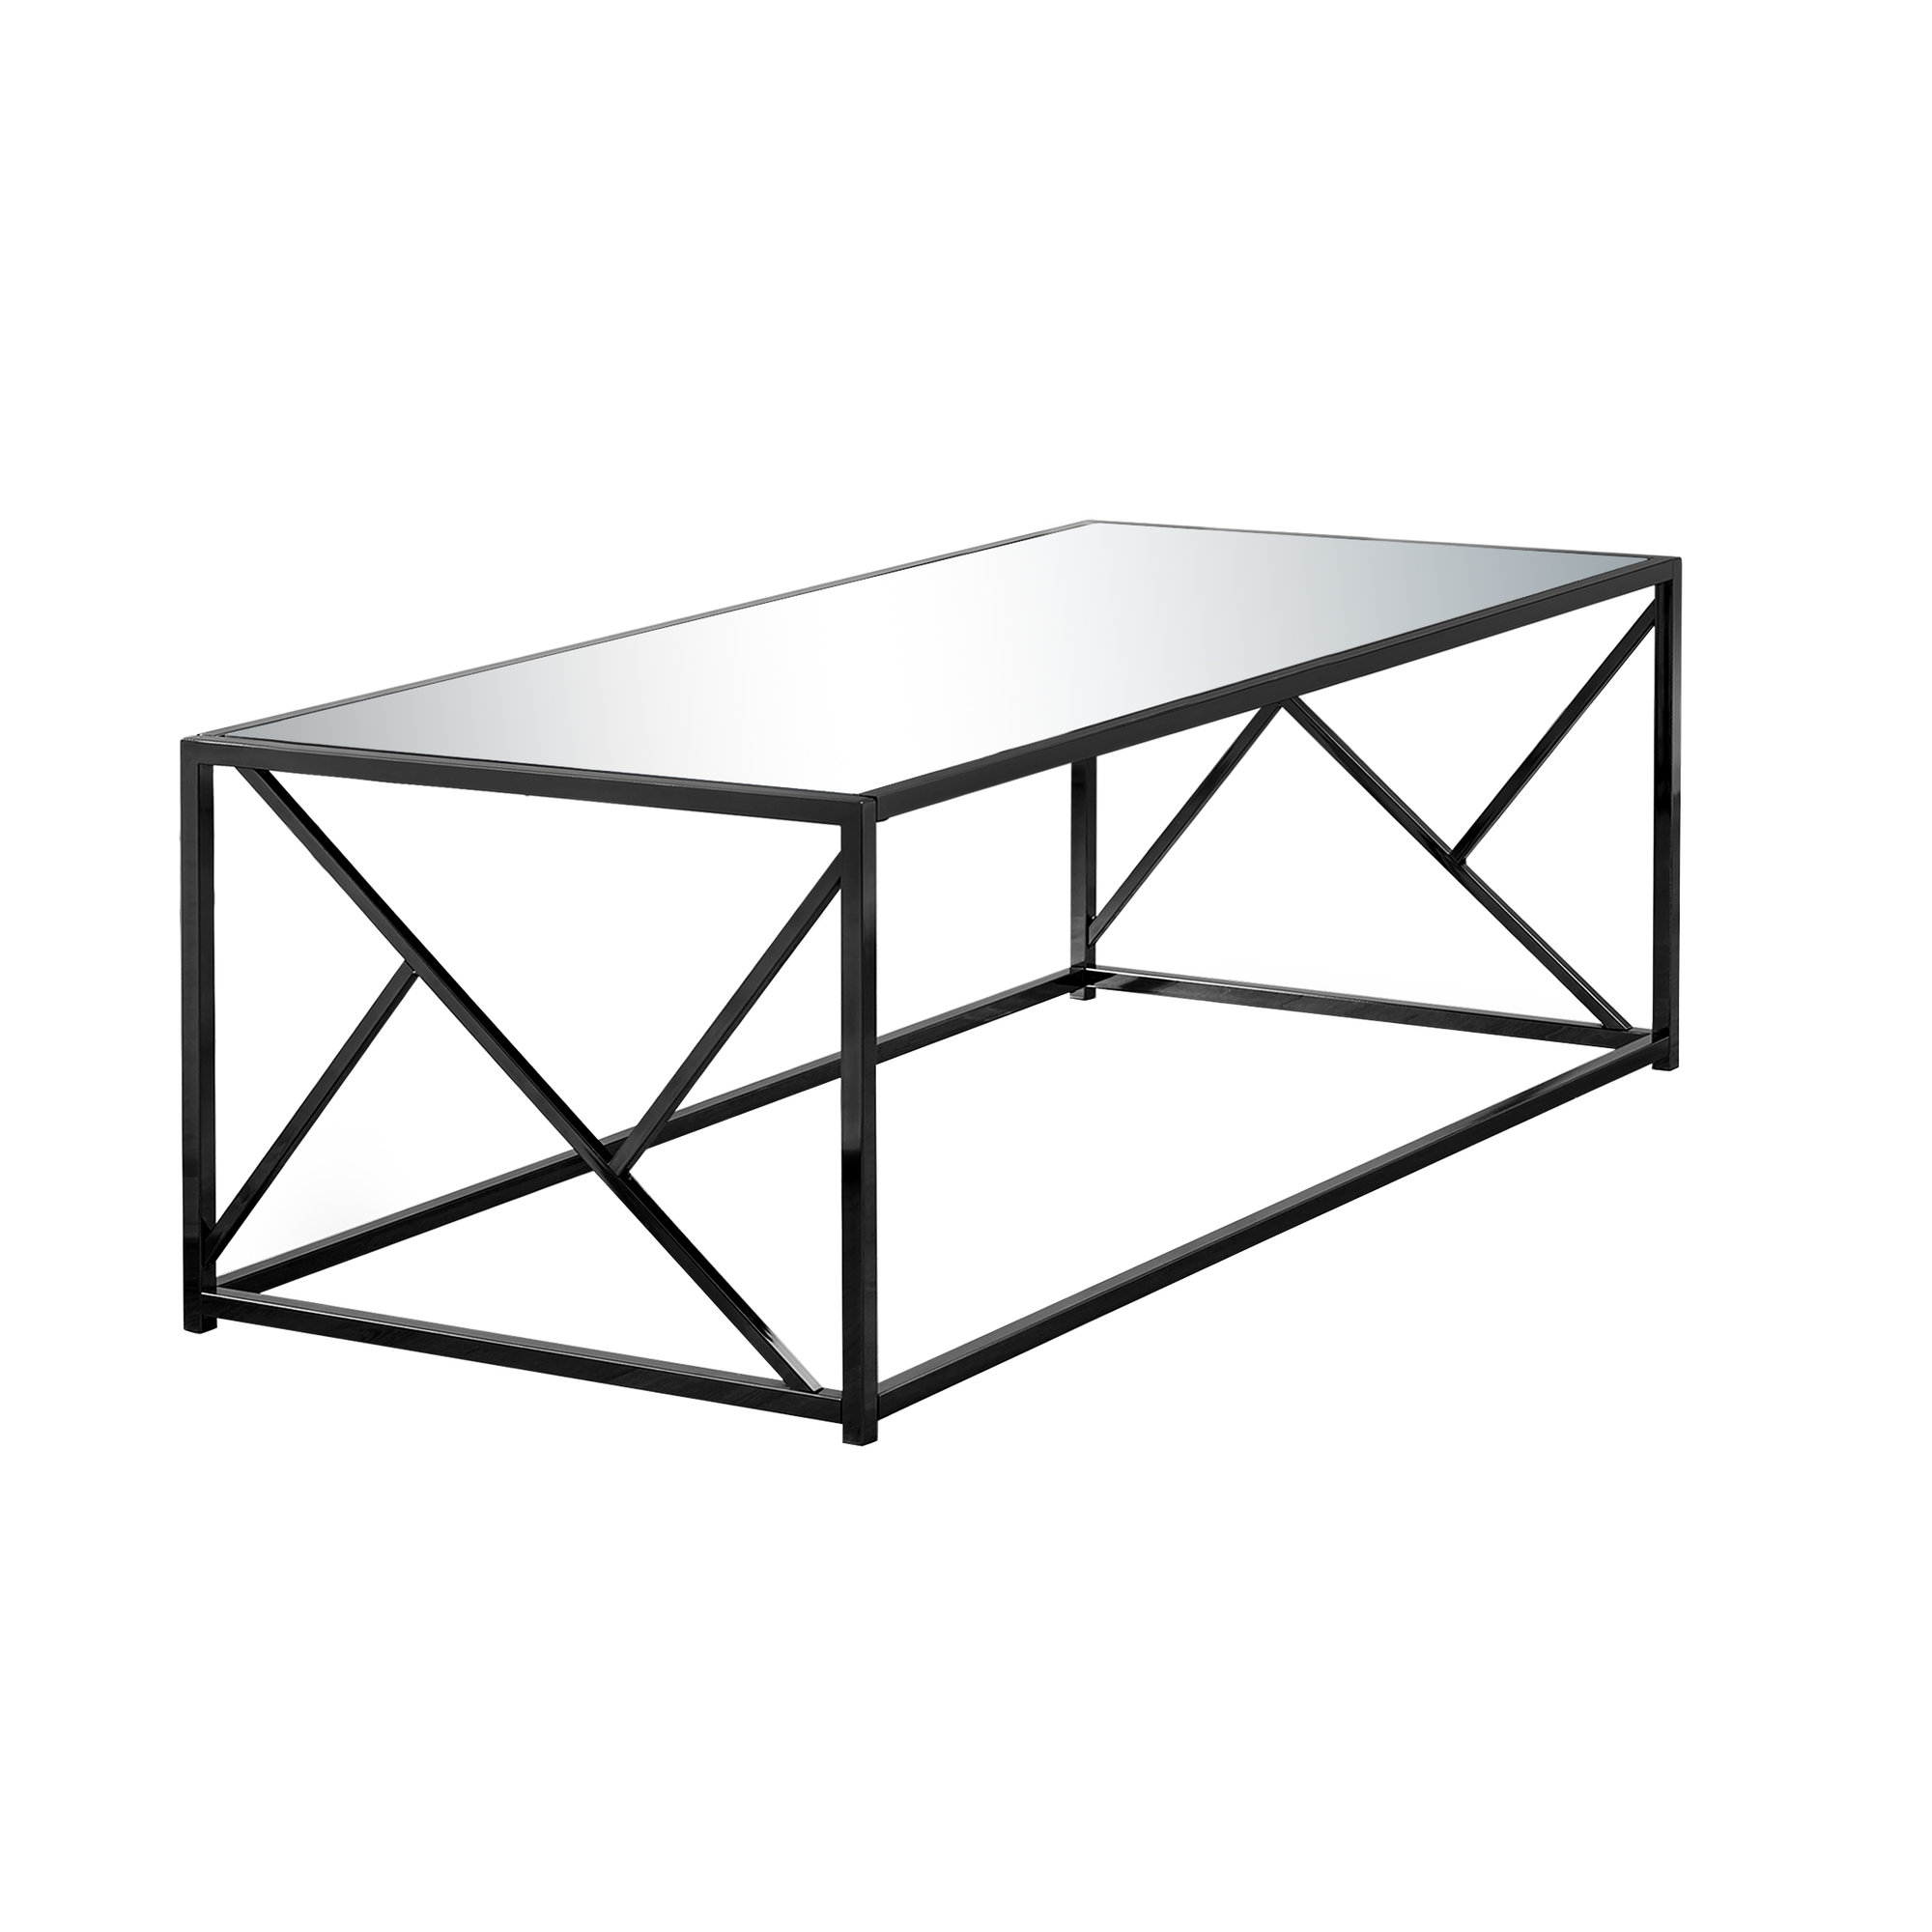 23.75" x 47.25" x 17.5" Black Metal Glass Particle Board Coffee Table with a Mirror Top